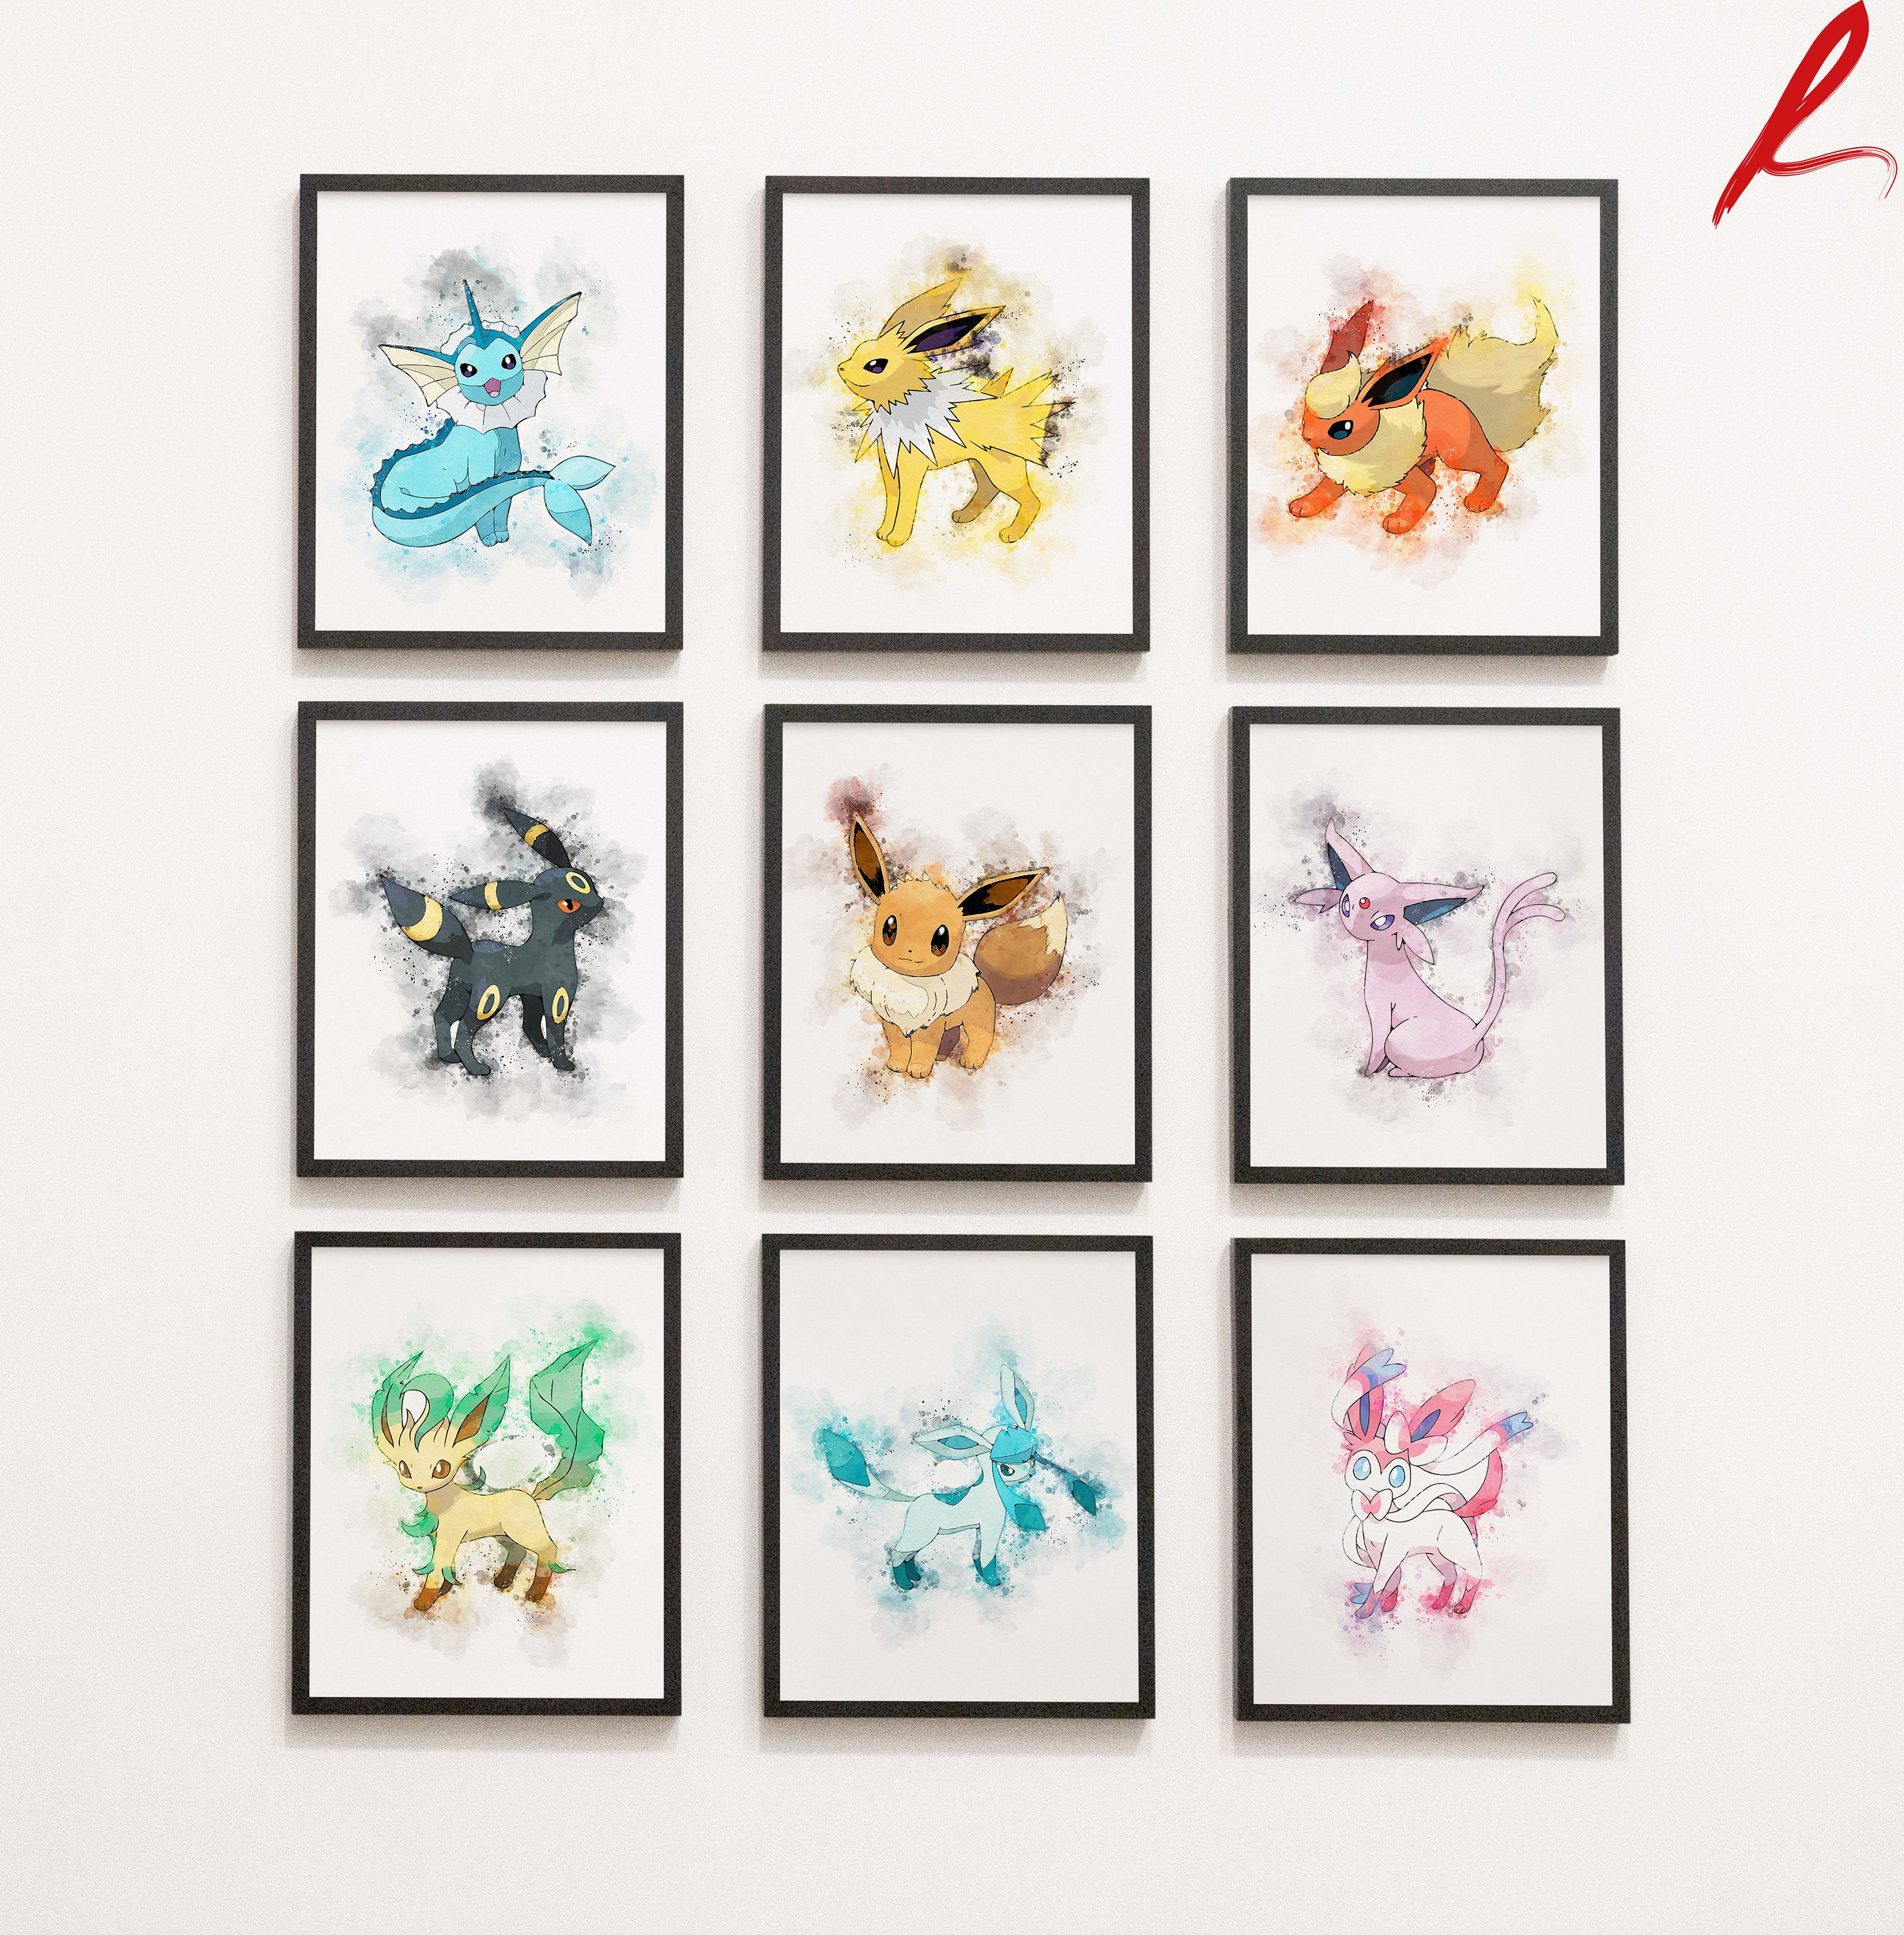  Bundle - 2 Items - Pokemon Eevee Evolutions Poster - 91.5 x  61cms (36 x 24 Inches) and a Set of 4 Repositionable Adhesive Pads for Easy  Wall Fixing: Posters & Prints